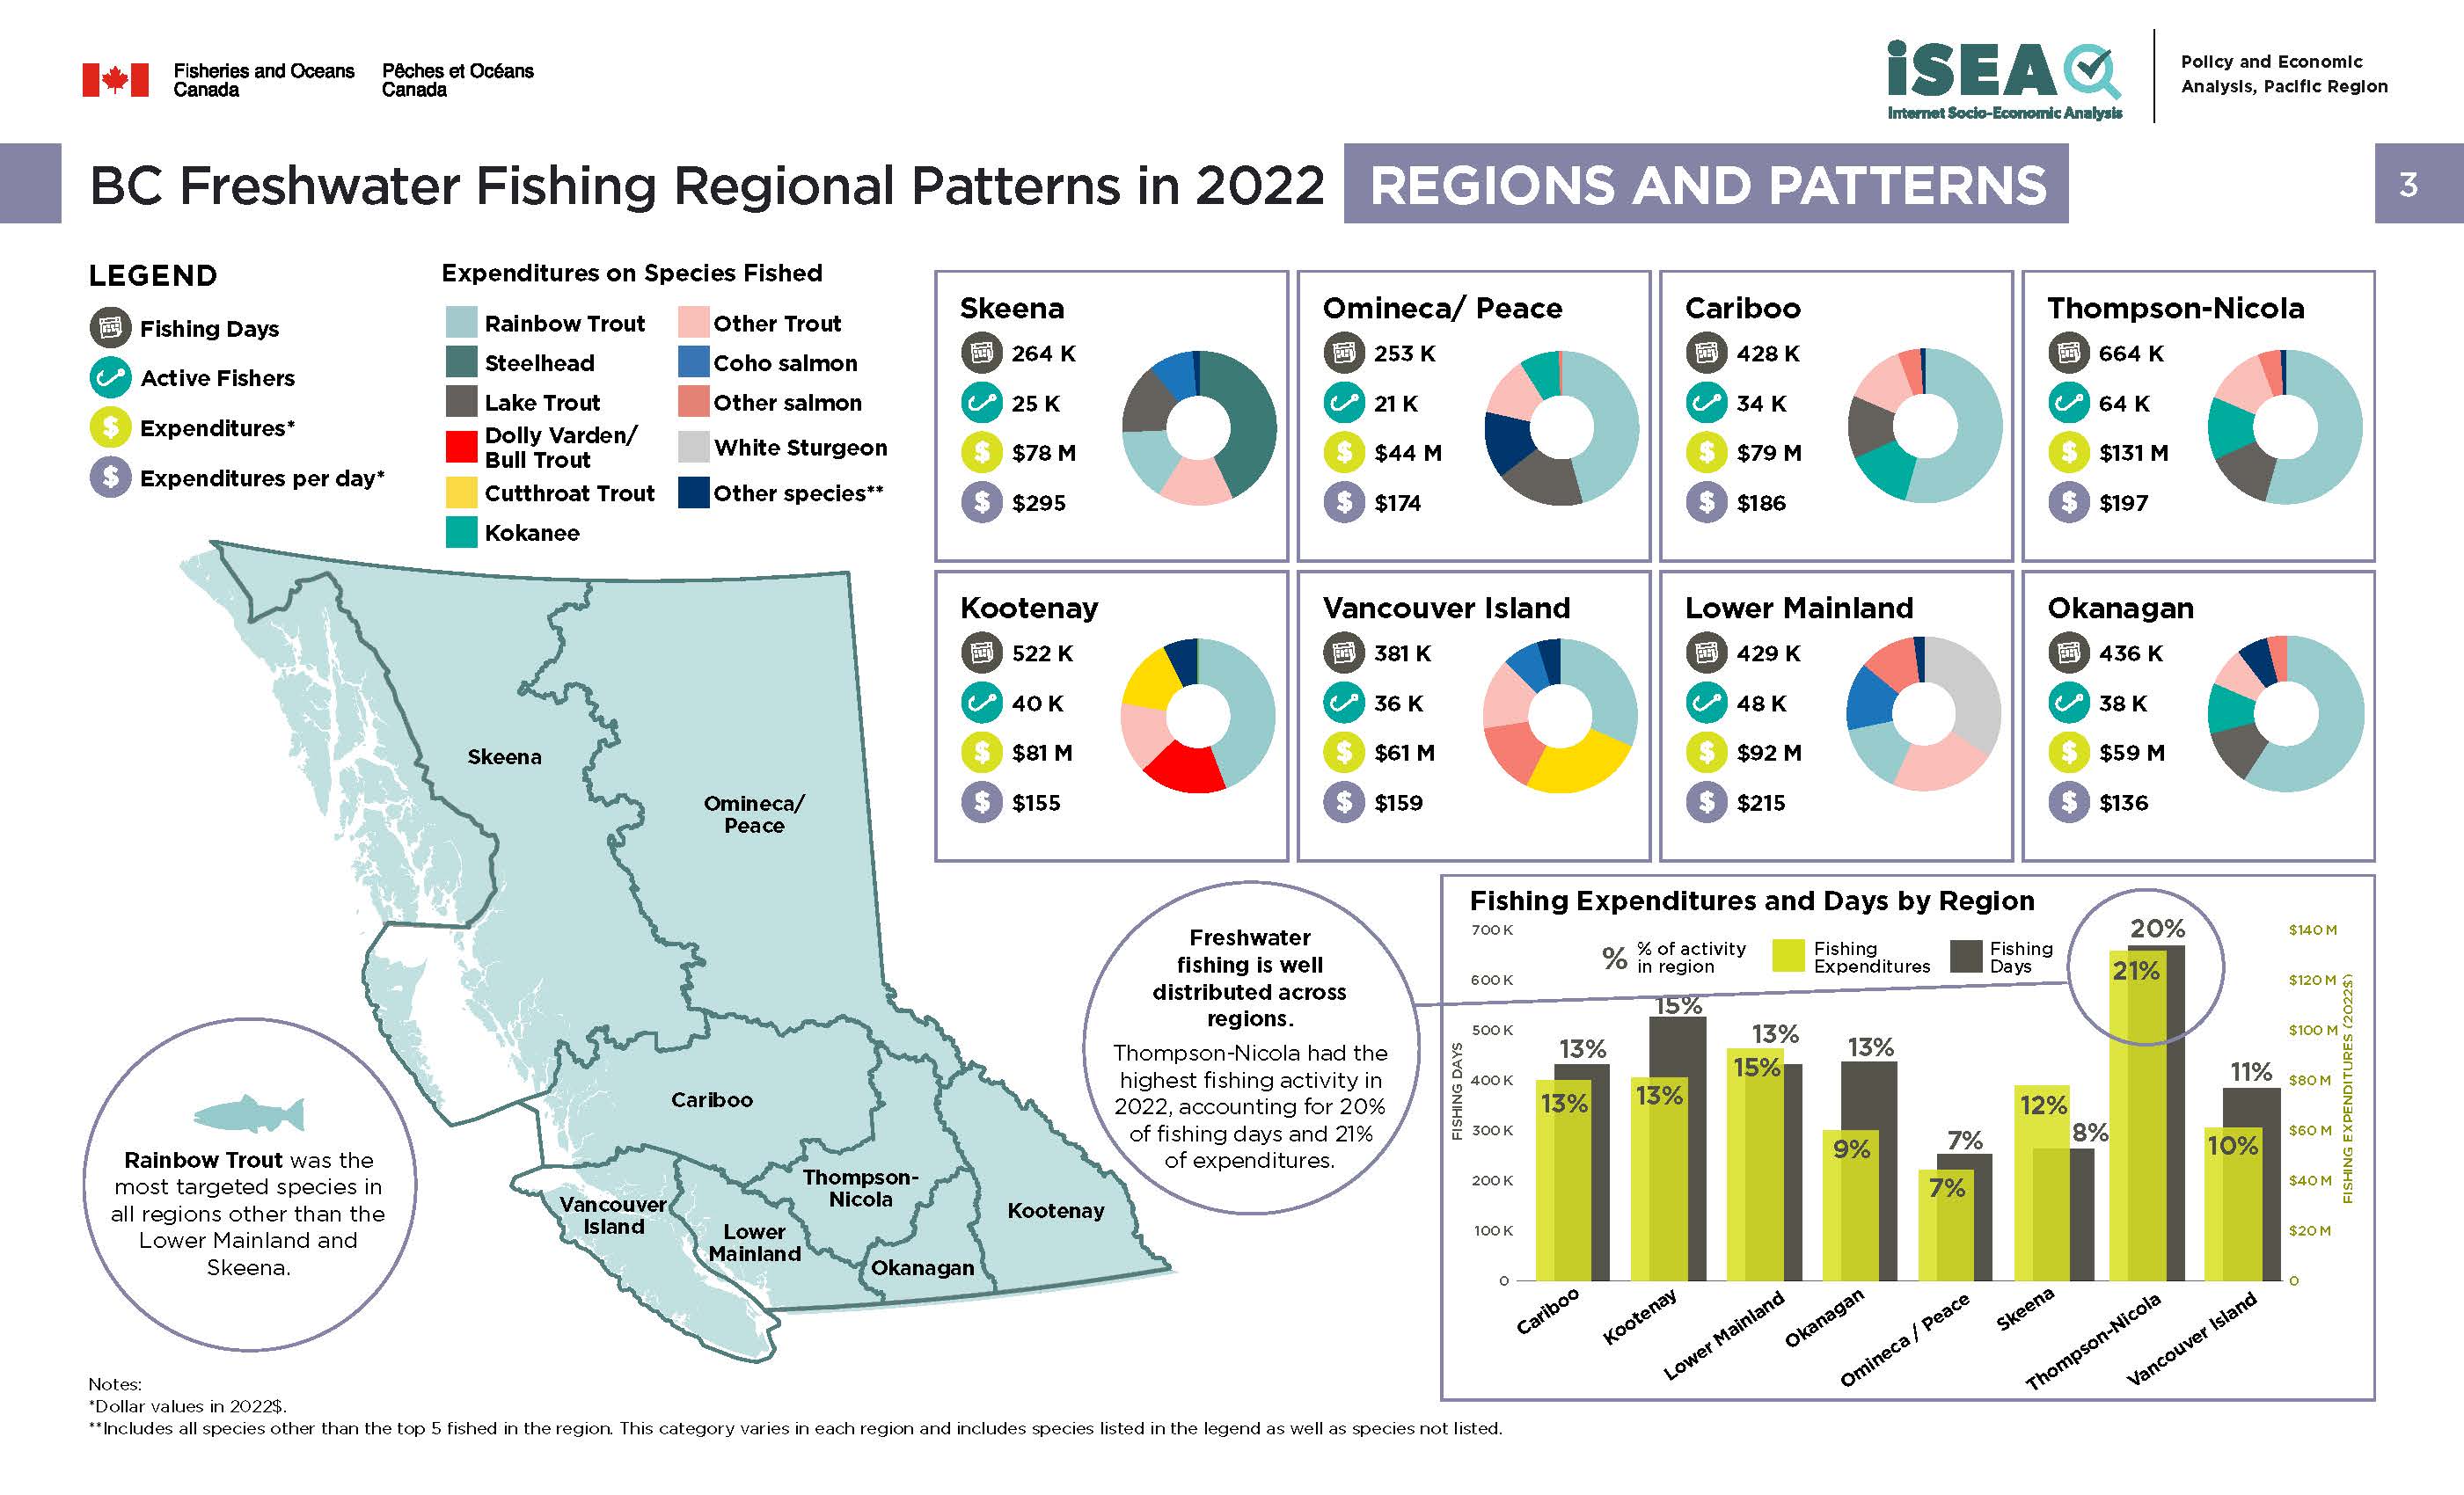 Photo: infographic of BC freshwater fishing regional patterns in 2022